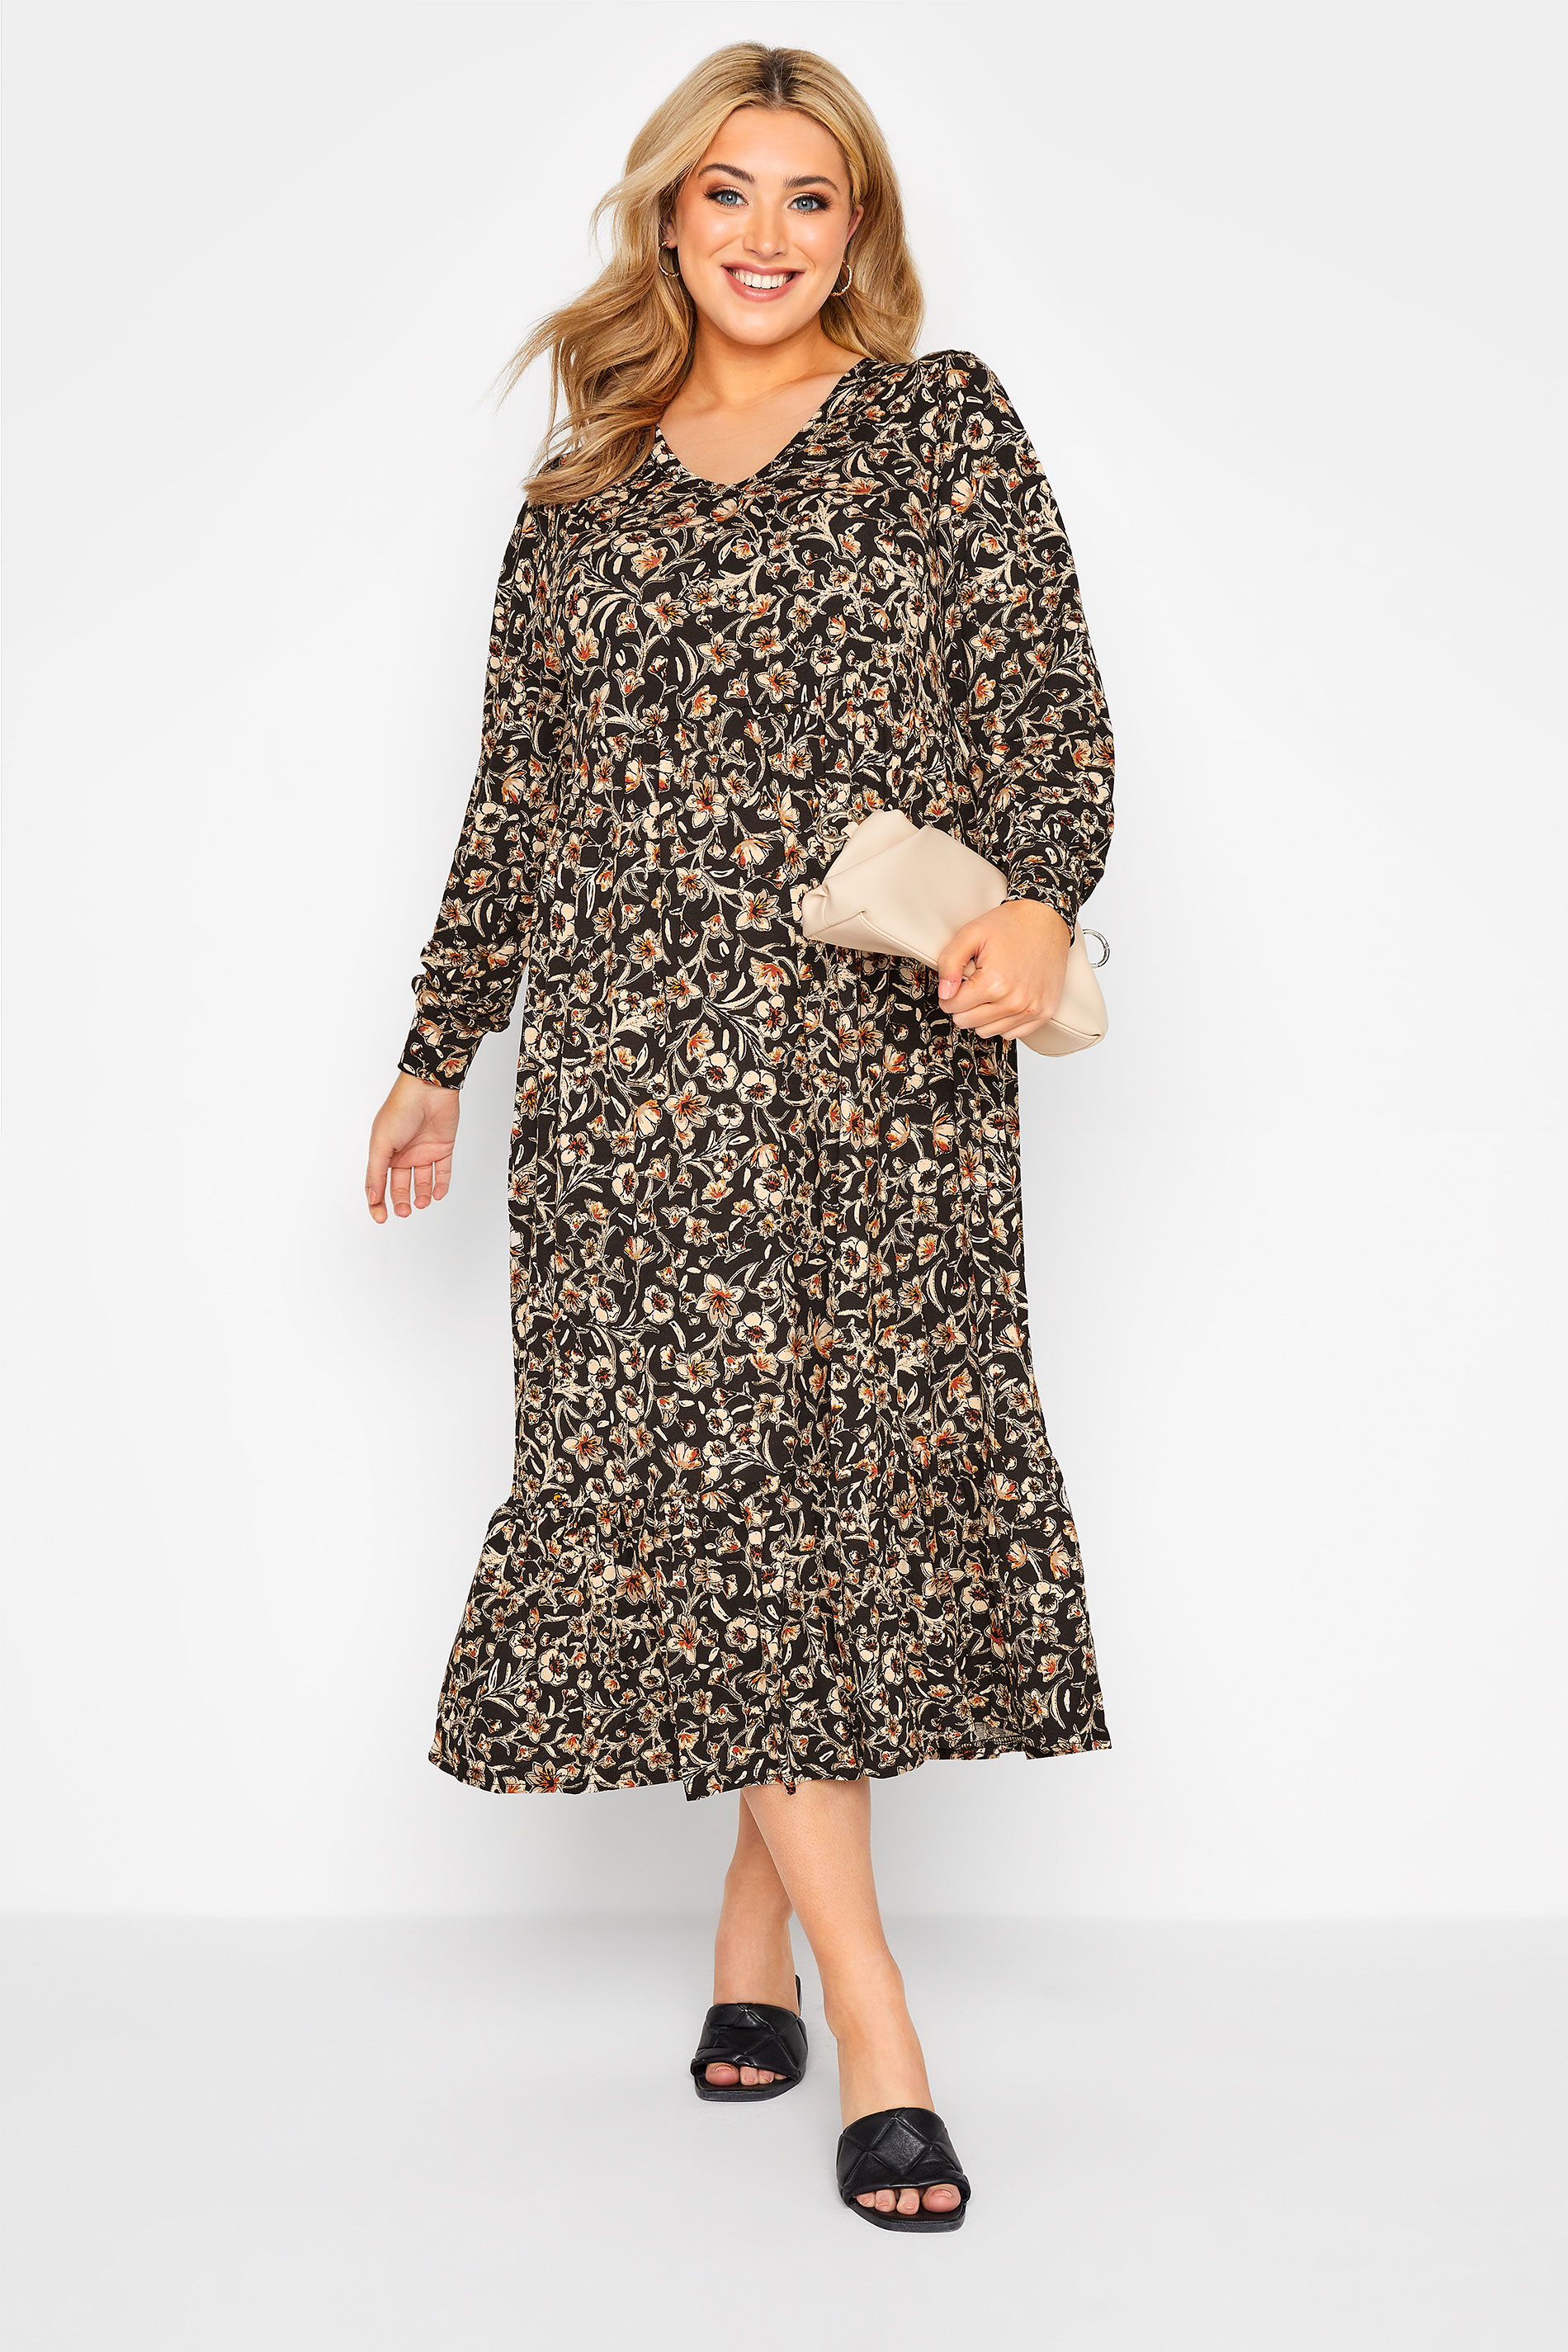 Robes Grande Taille Grande taille  Robes Manches Longues | LIMITED COLLECTION - Robe Noire Floral Volanté - QI06663